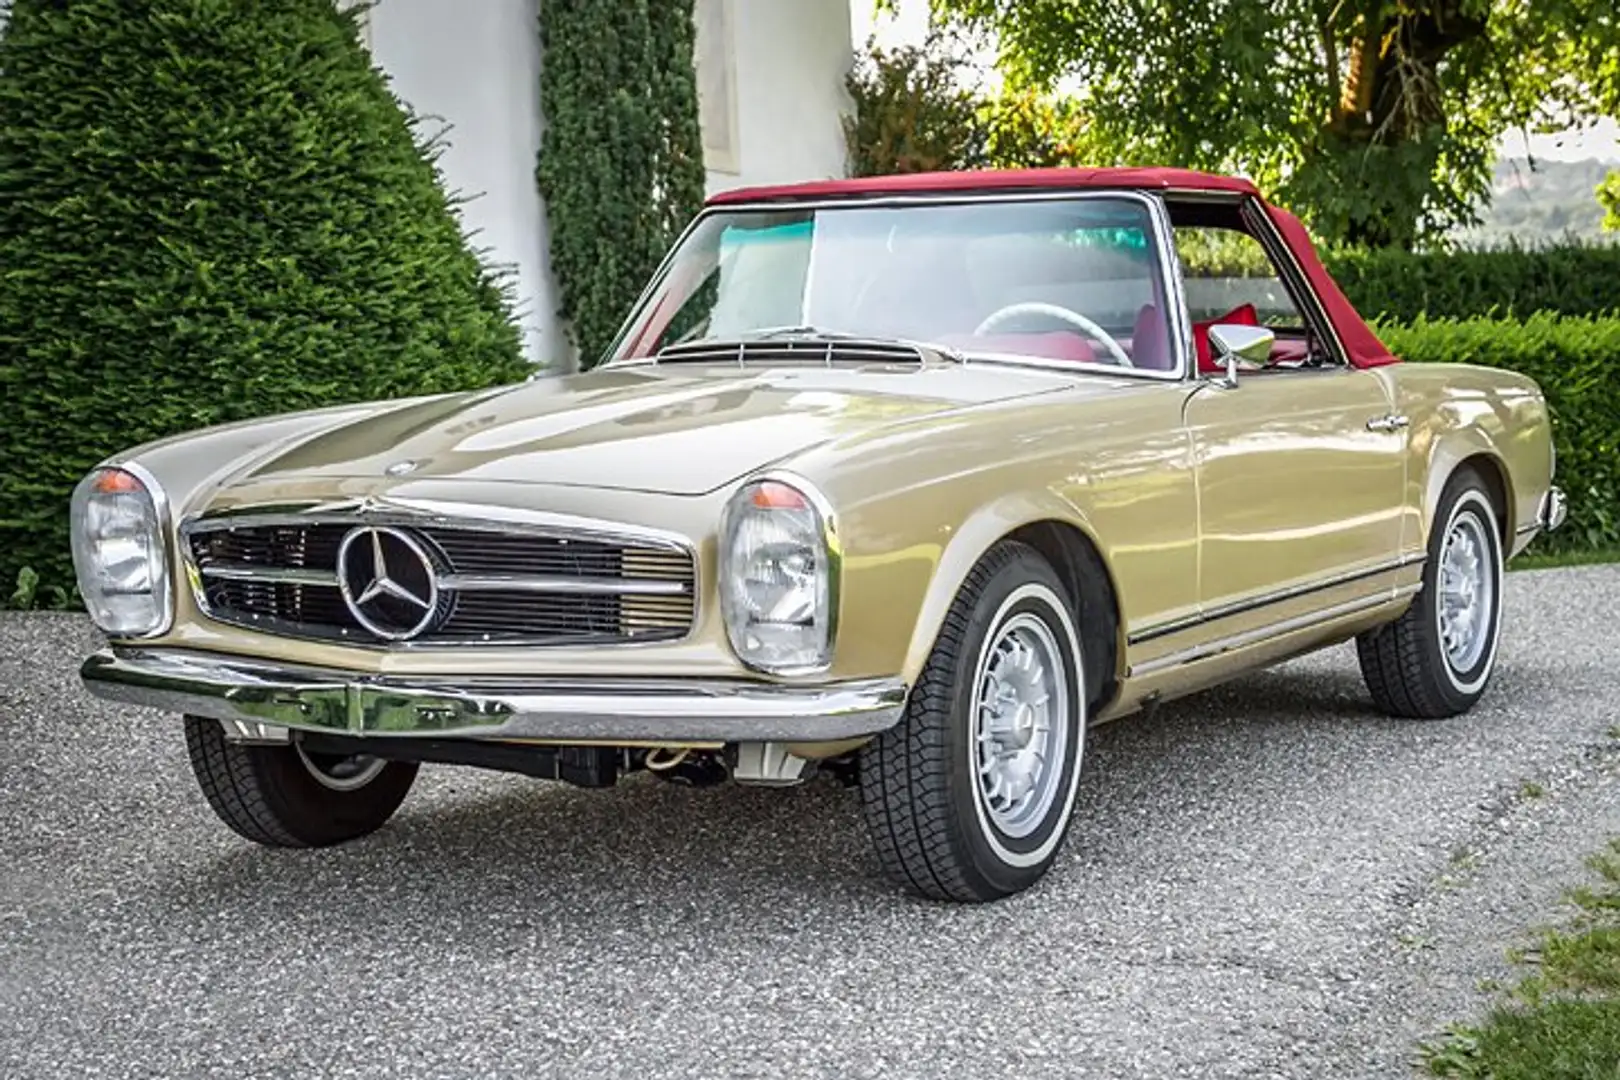 Mercedes-Benz SL 280 "Pagode" Cabriolet (matching numbers) Or - 1